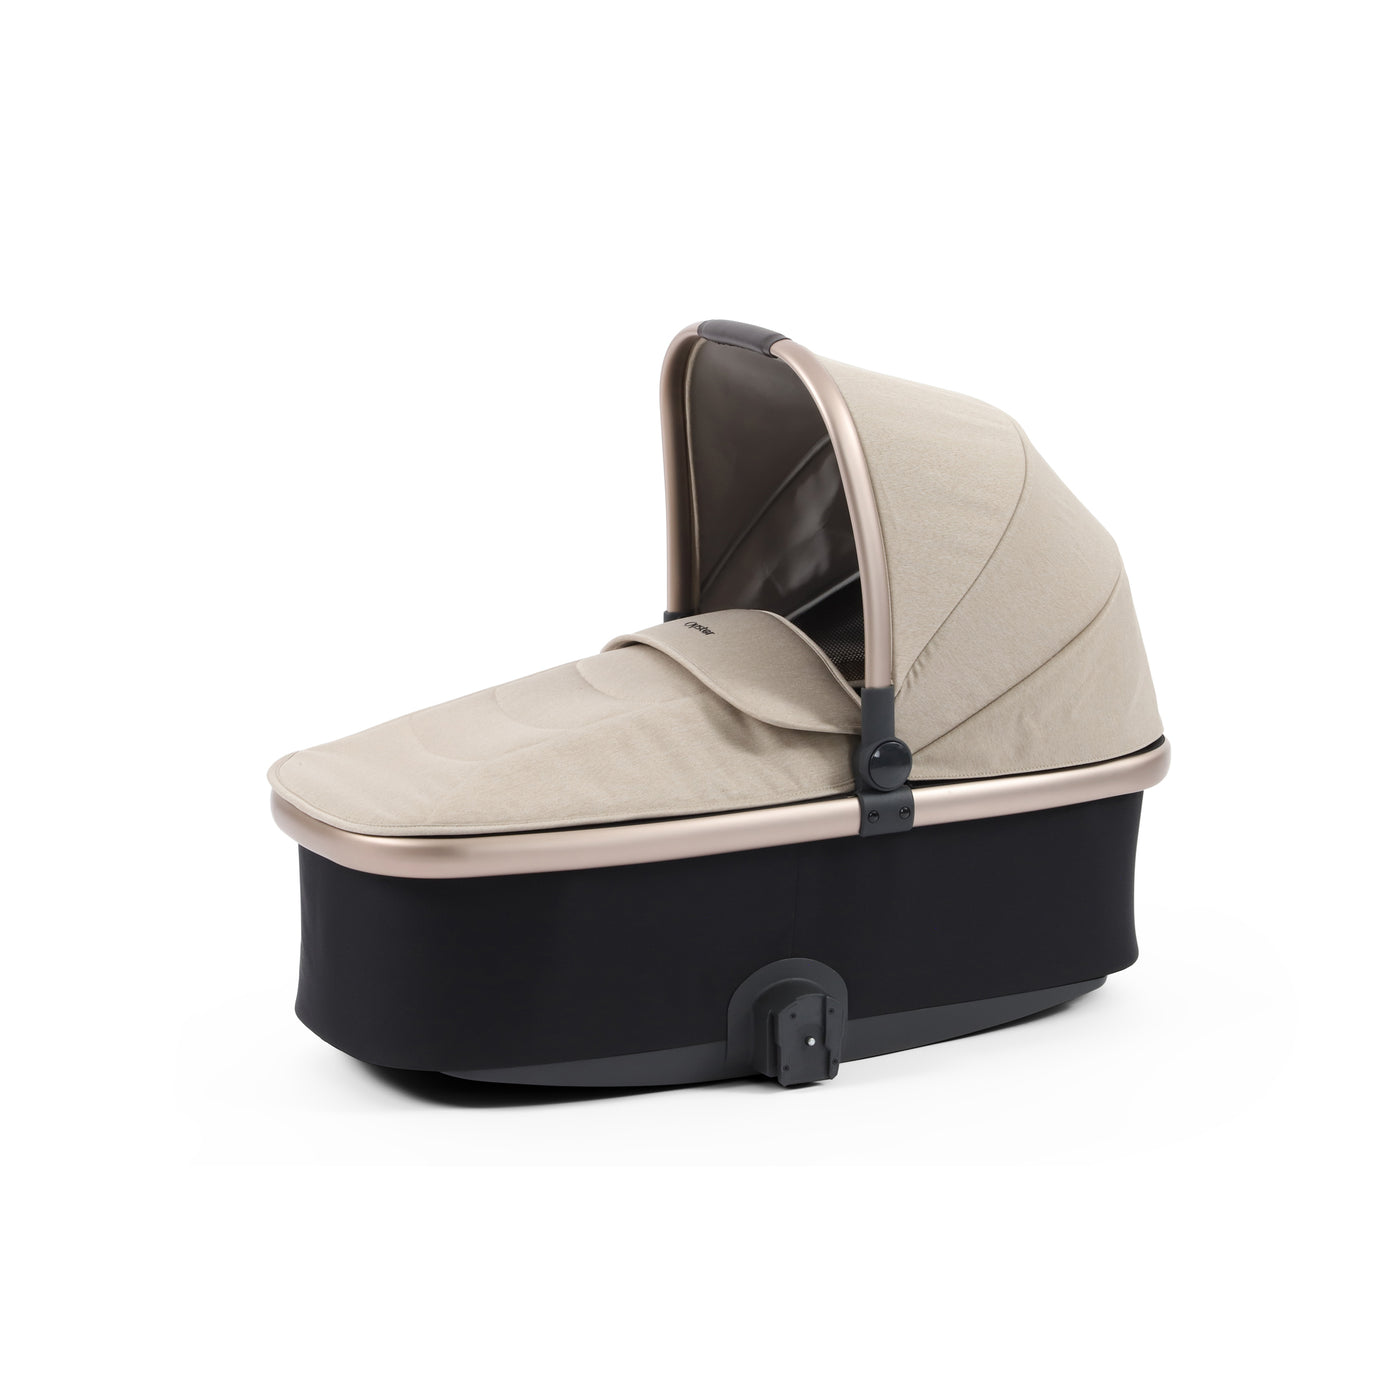 Babystyle Oyster 3 Carrycot - Creme Brulee